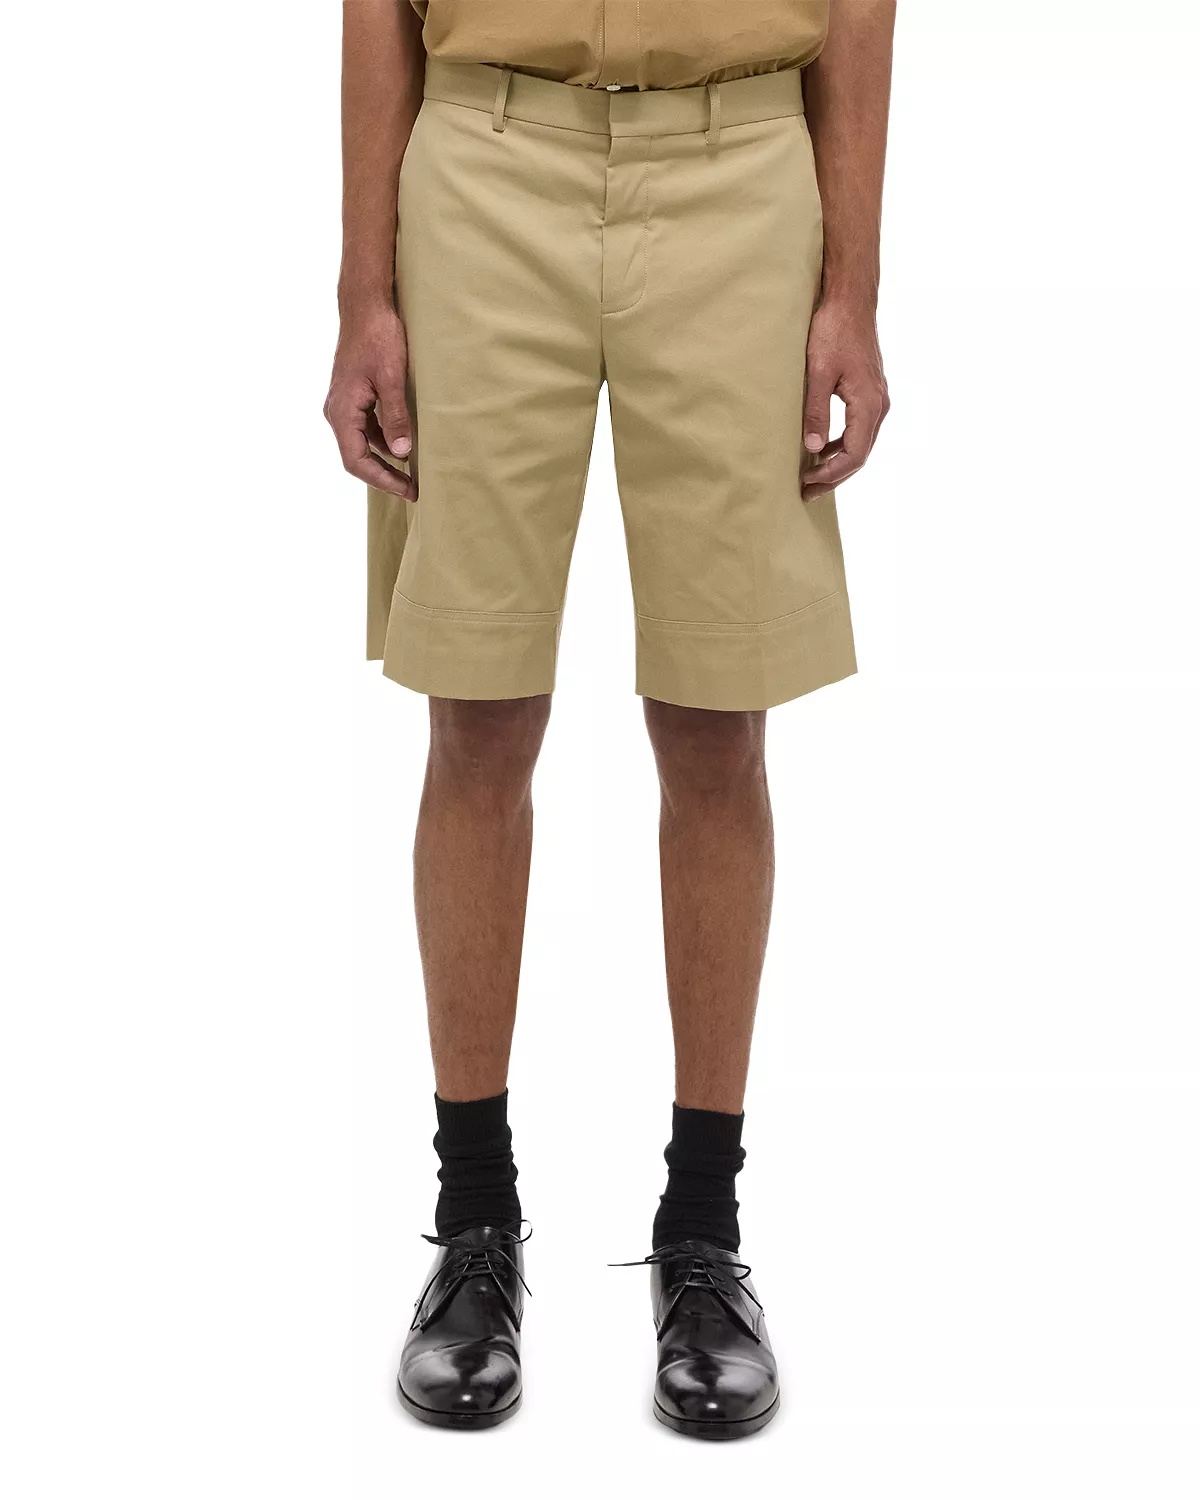 Relaxed Fit 9" Carpenter Shorts - 1